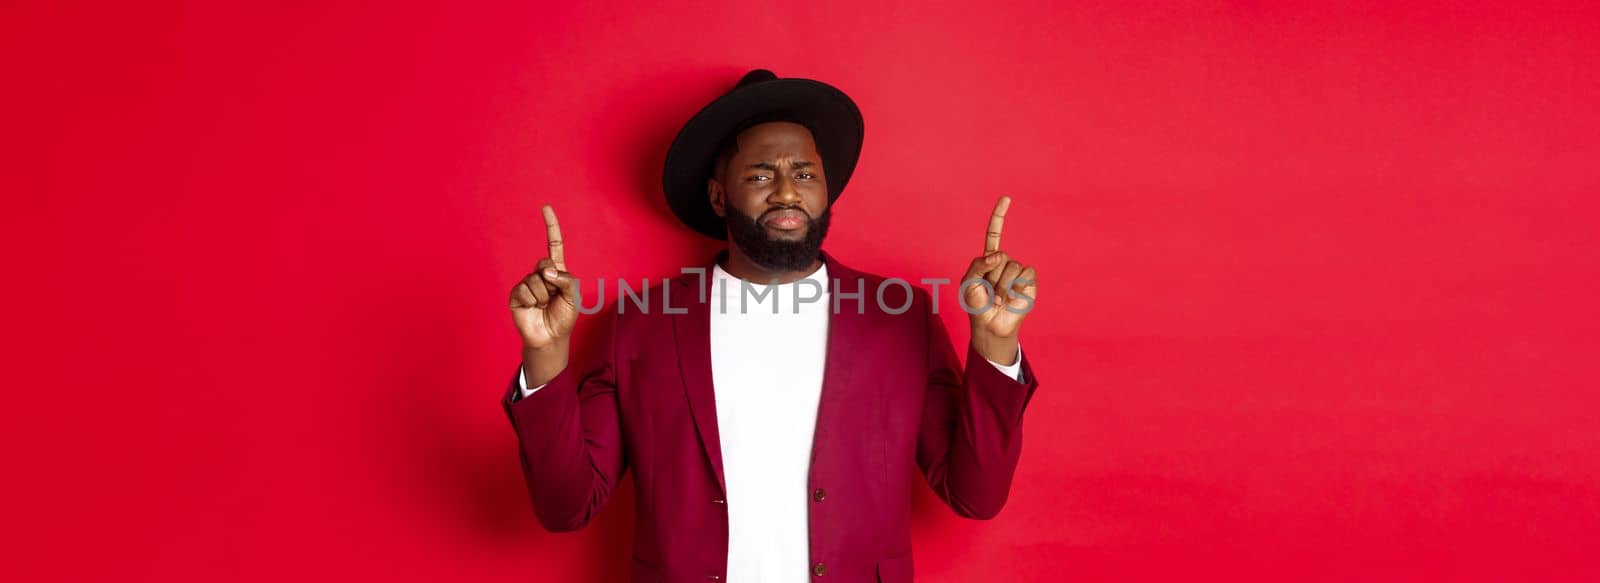 Winter holidays and shopping concept. Skeptical Black man grimasing and showing dislike, pointing fingers up at bad offer, standing over red background.